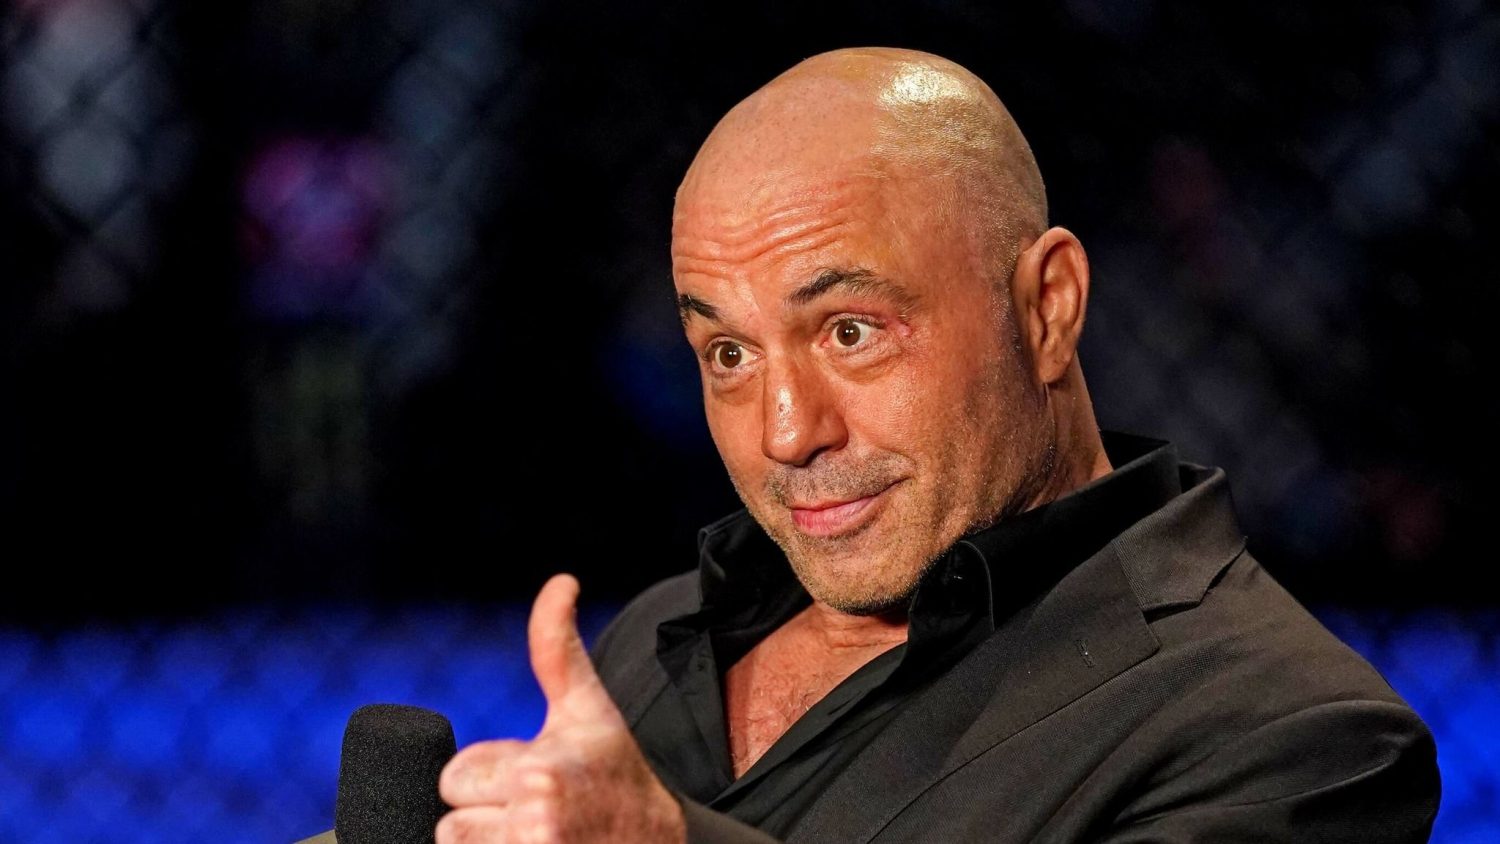 Joe Rogan To Disney: Want Your Stock To Rise? Say "f*** It, We're On Team Johnny depp"